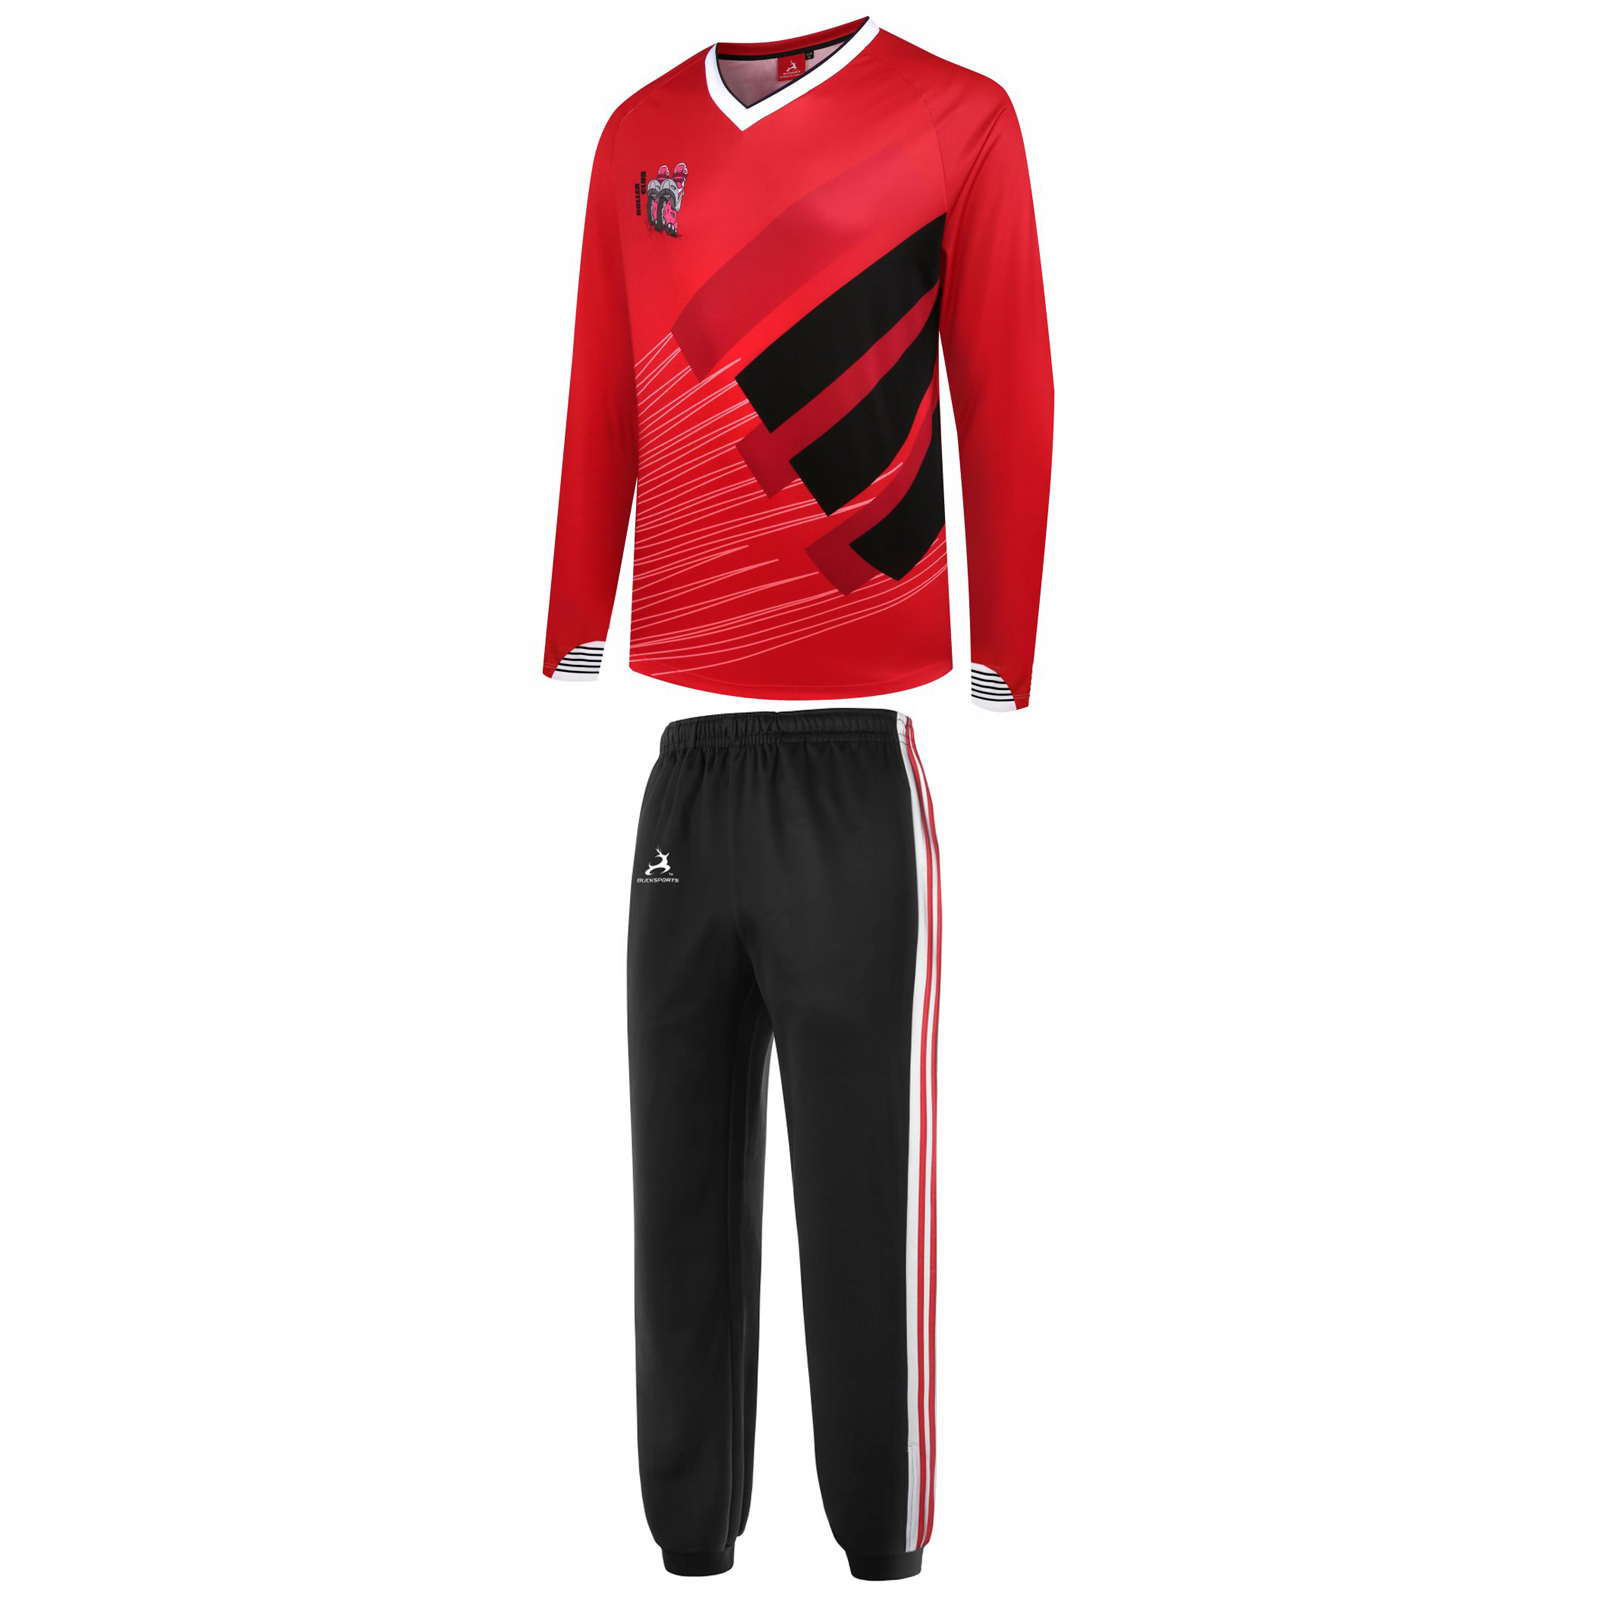 ROLLER SPORTS TEAM CLOTHING-L0307RBW10